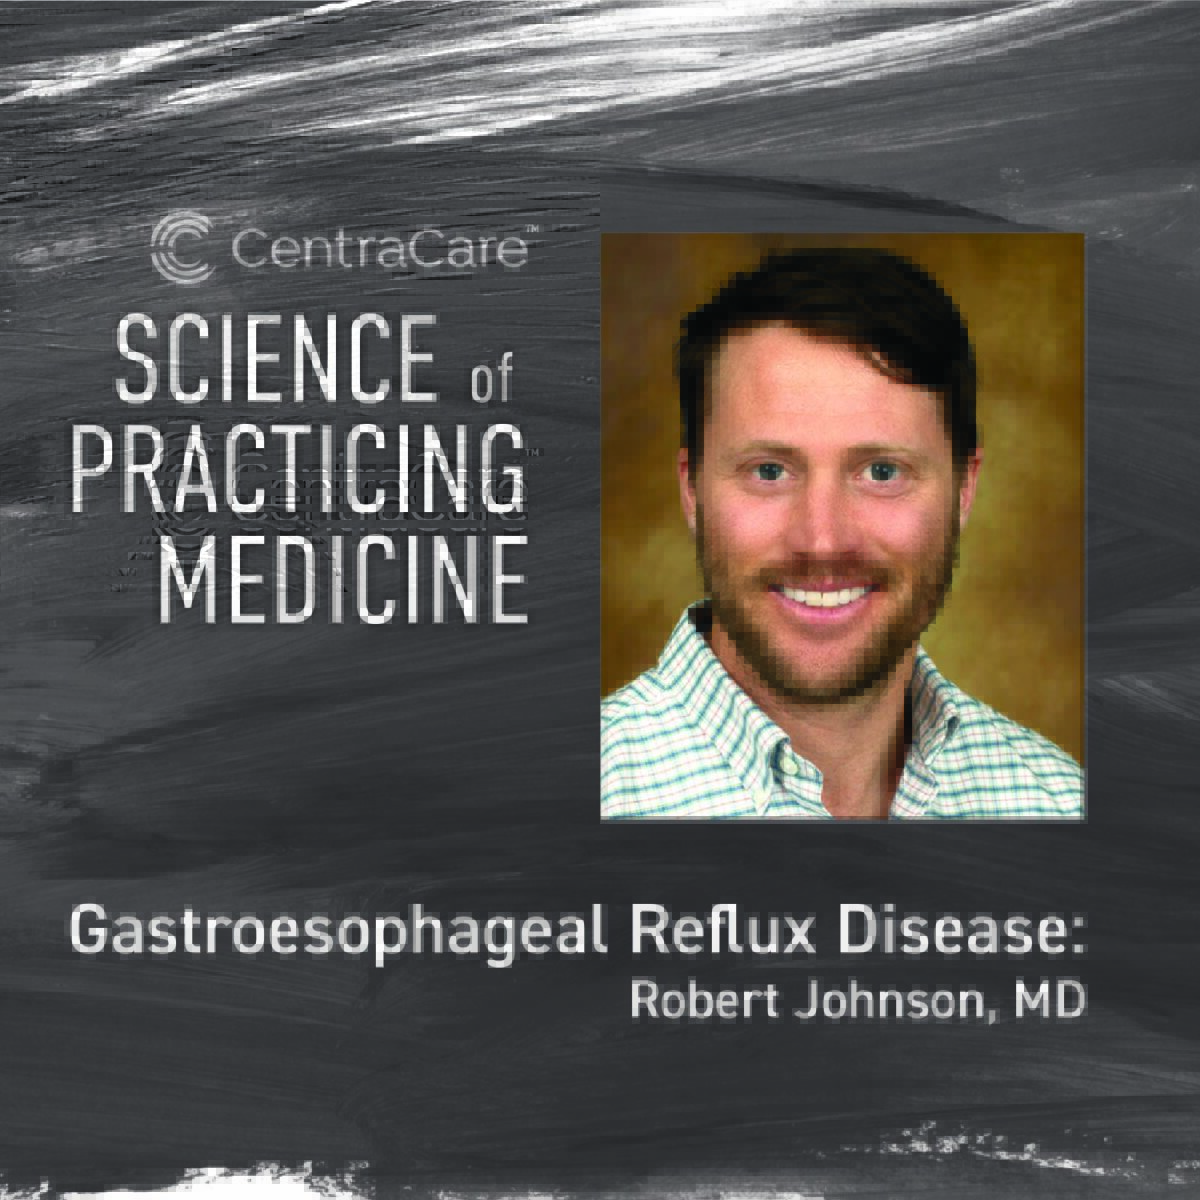 Cover art for the Science of Practicing Medicine CME with Bob Johnson, MD, on the topic of Gastroesophageal Reflux Disease